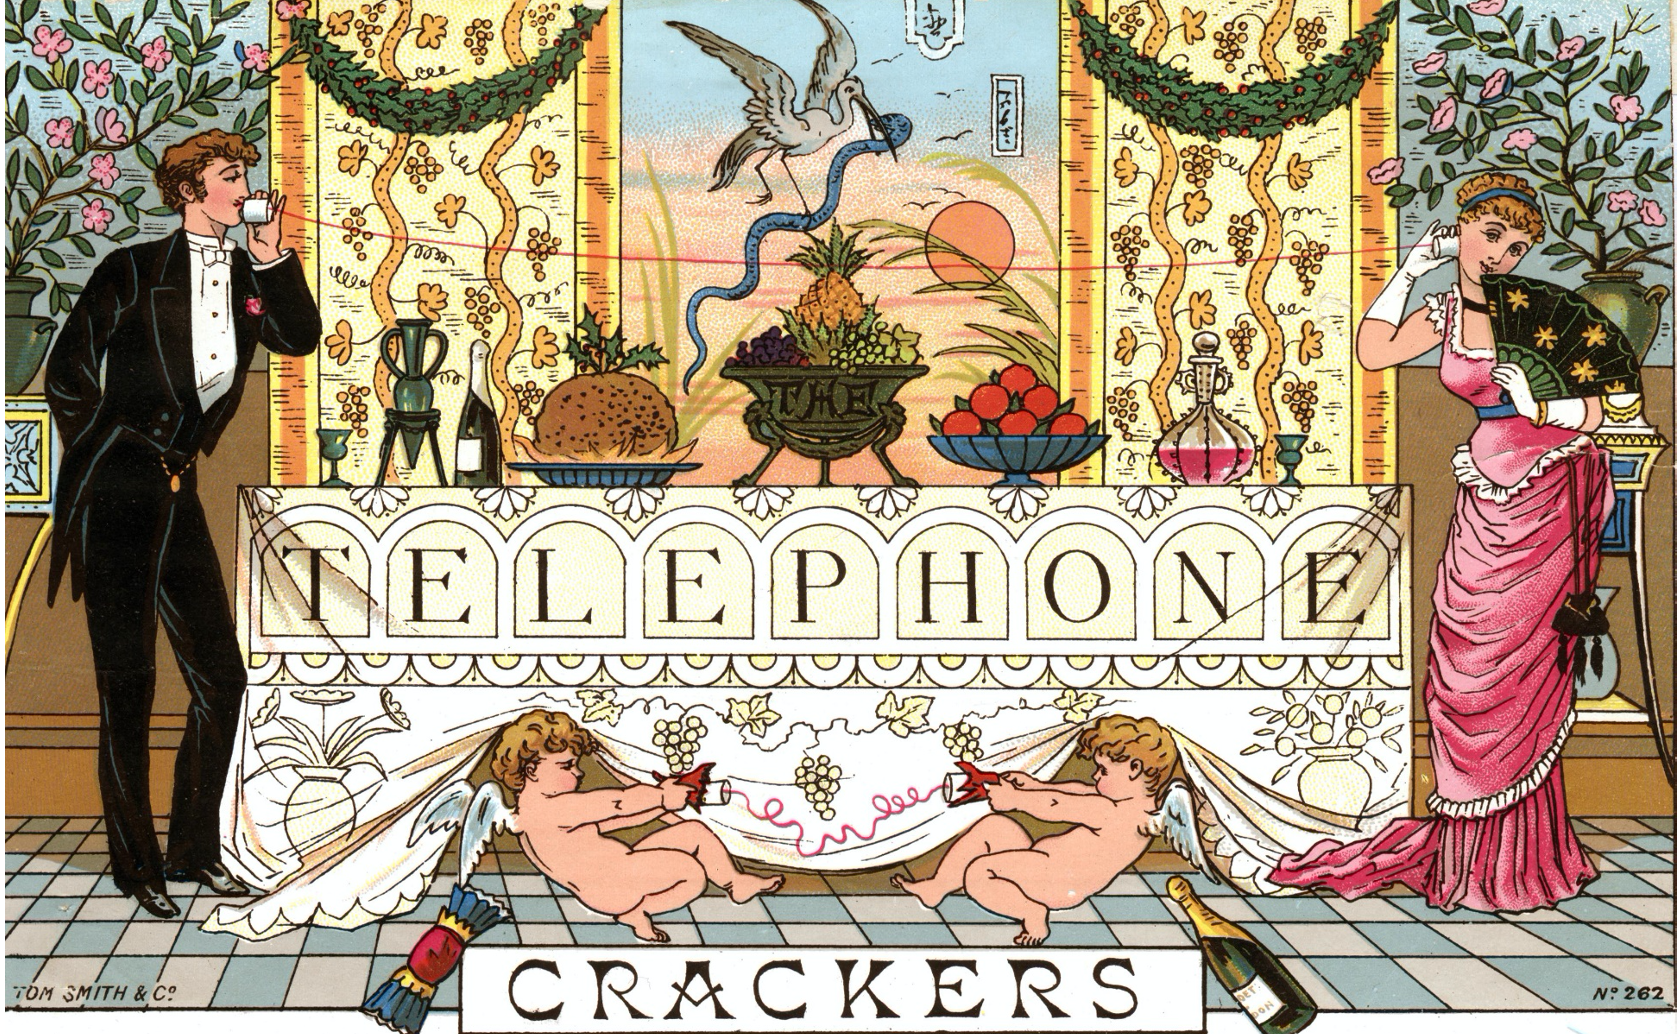 Above: Tom Smith Telephone Crackers from 1878.